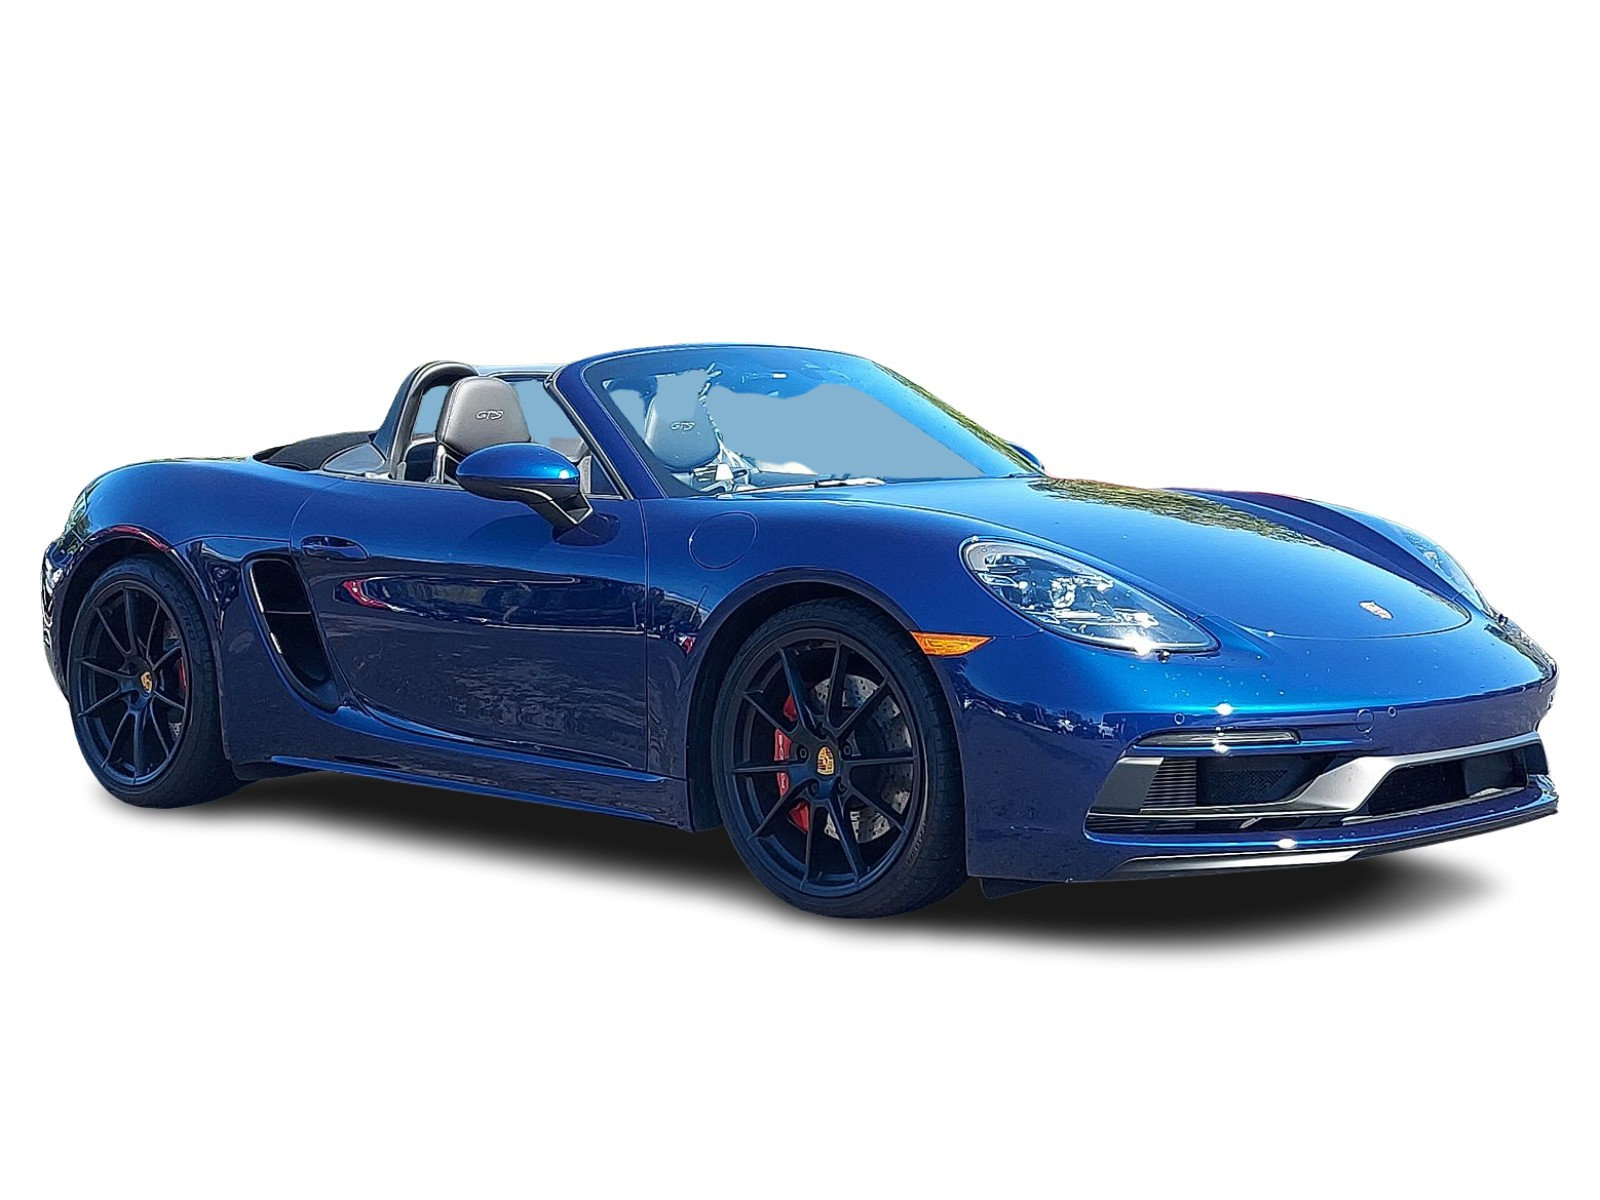 Certified Pre-Owned 2021 Porsche 718 Boxster GTS 4.0 Convertible in  Mechanicsburg #MS232415 | Porsche Mechanicsburg